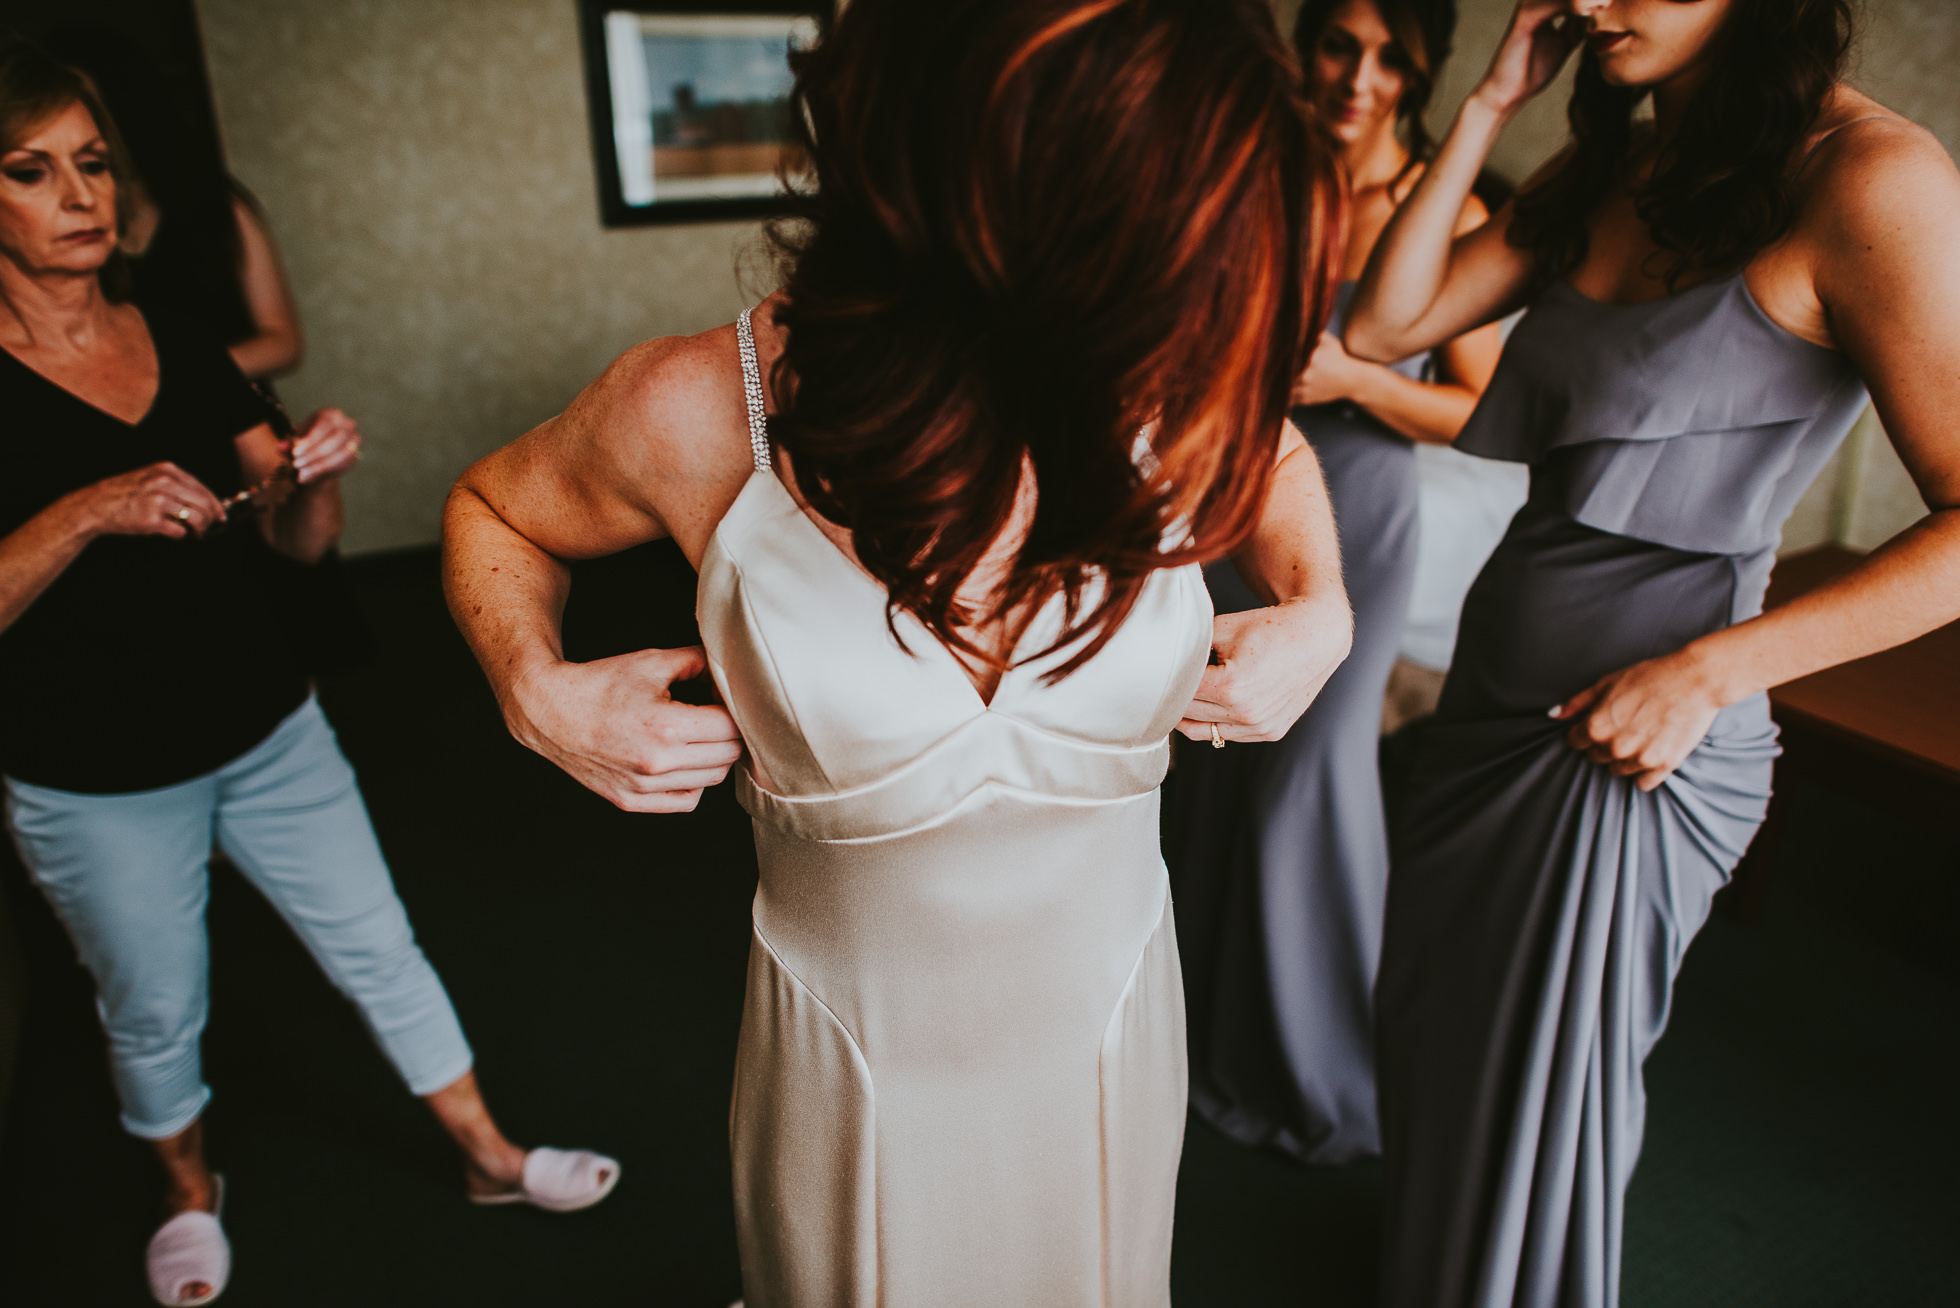 bride getting dressed with mom and bridesmaids at olde tater barn wedding in central bridge, ny photographed by traverse the tides